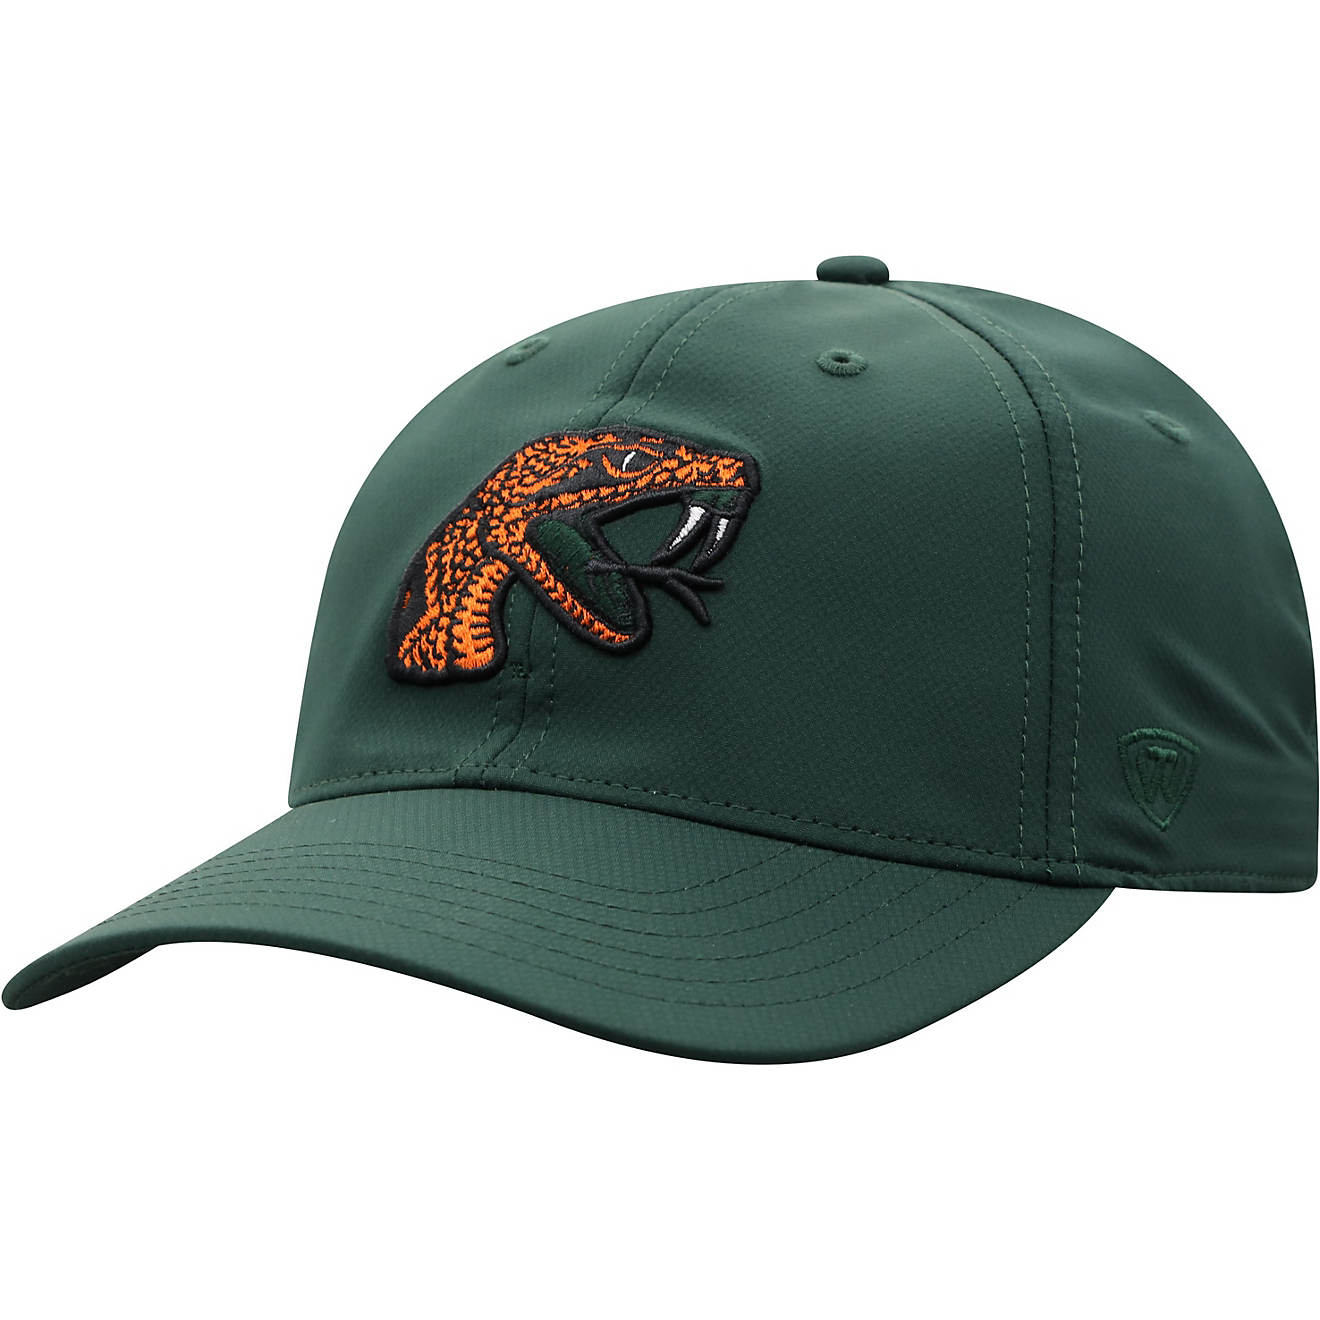 Top of the World Adults' Florida A&M University Trainer 20 Adjustable Team Color Cap                                             - view number 1